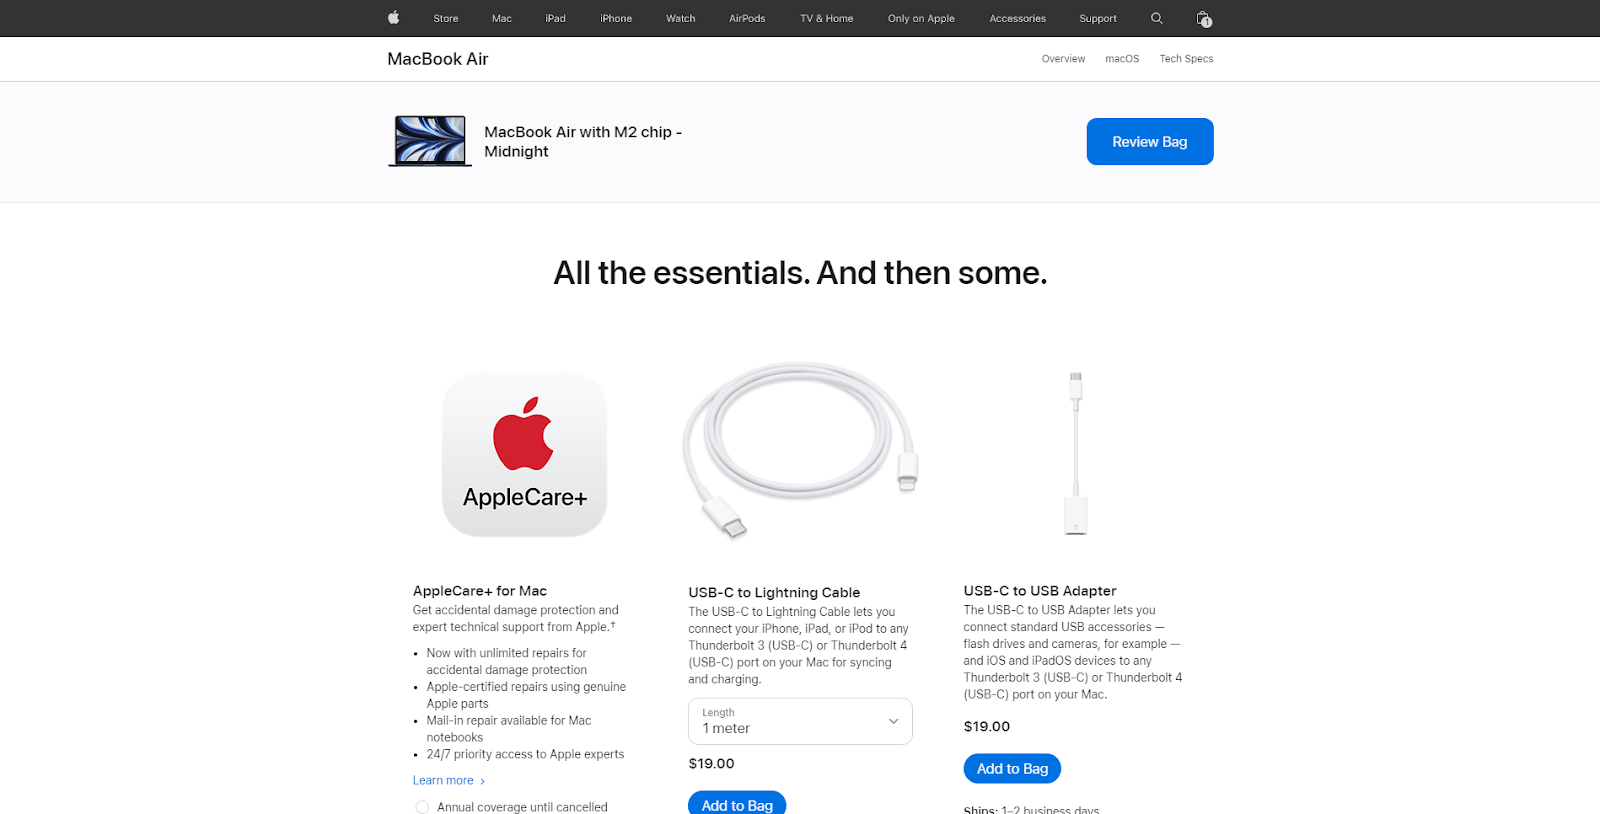 Apple's product page recommendations